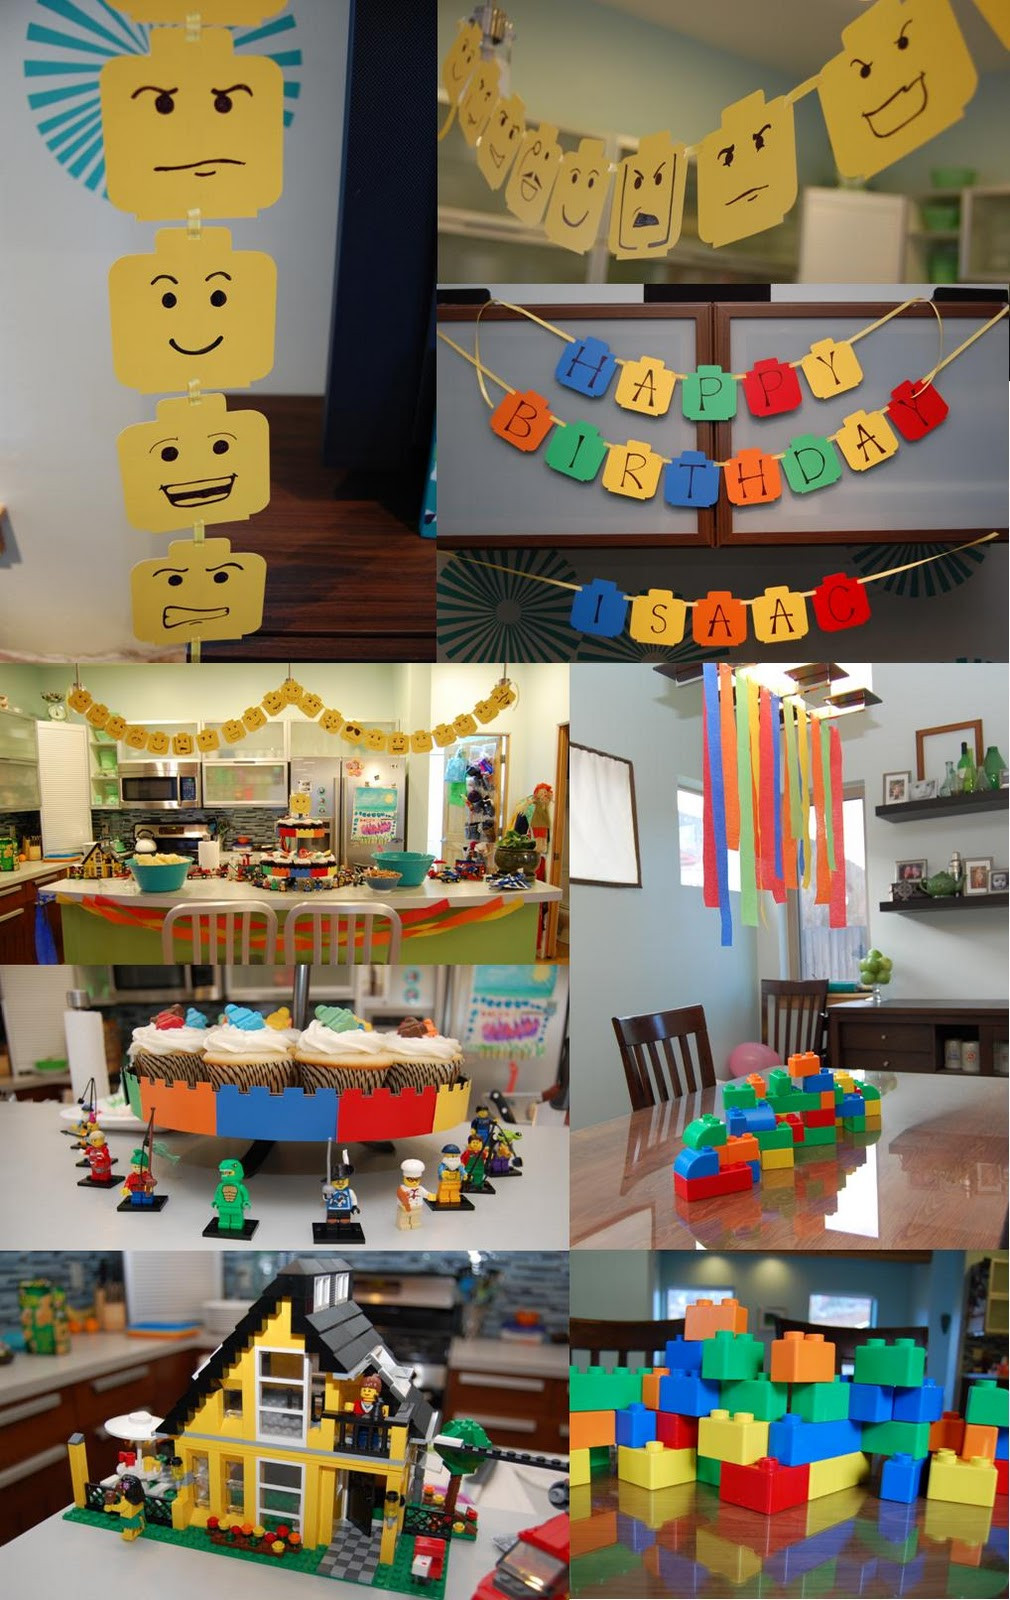 Lego Birthday Party Decorations
 "C" is for Crafty Lego Birthday Party